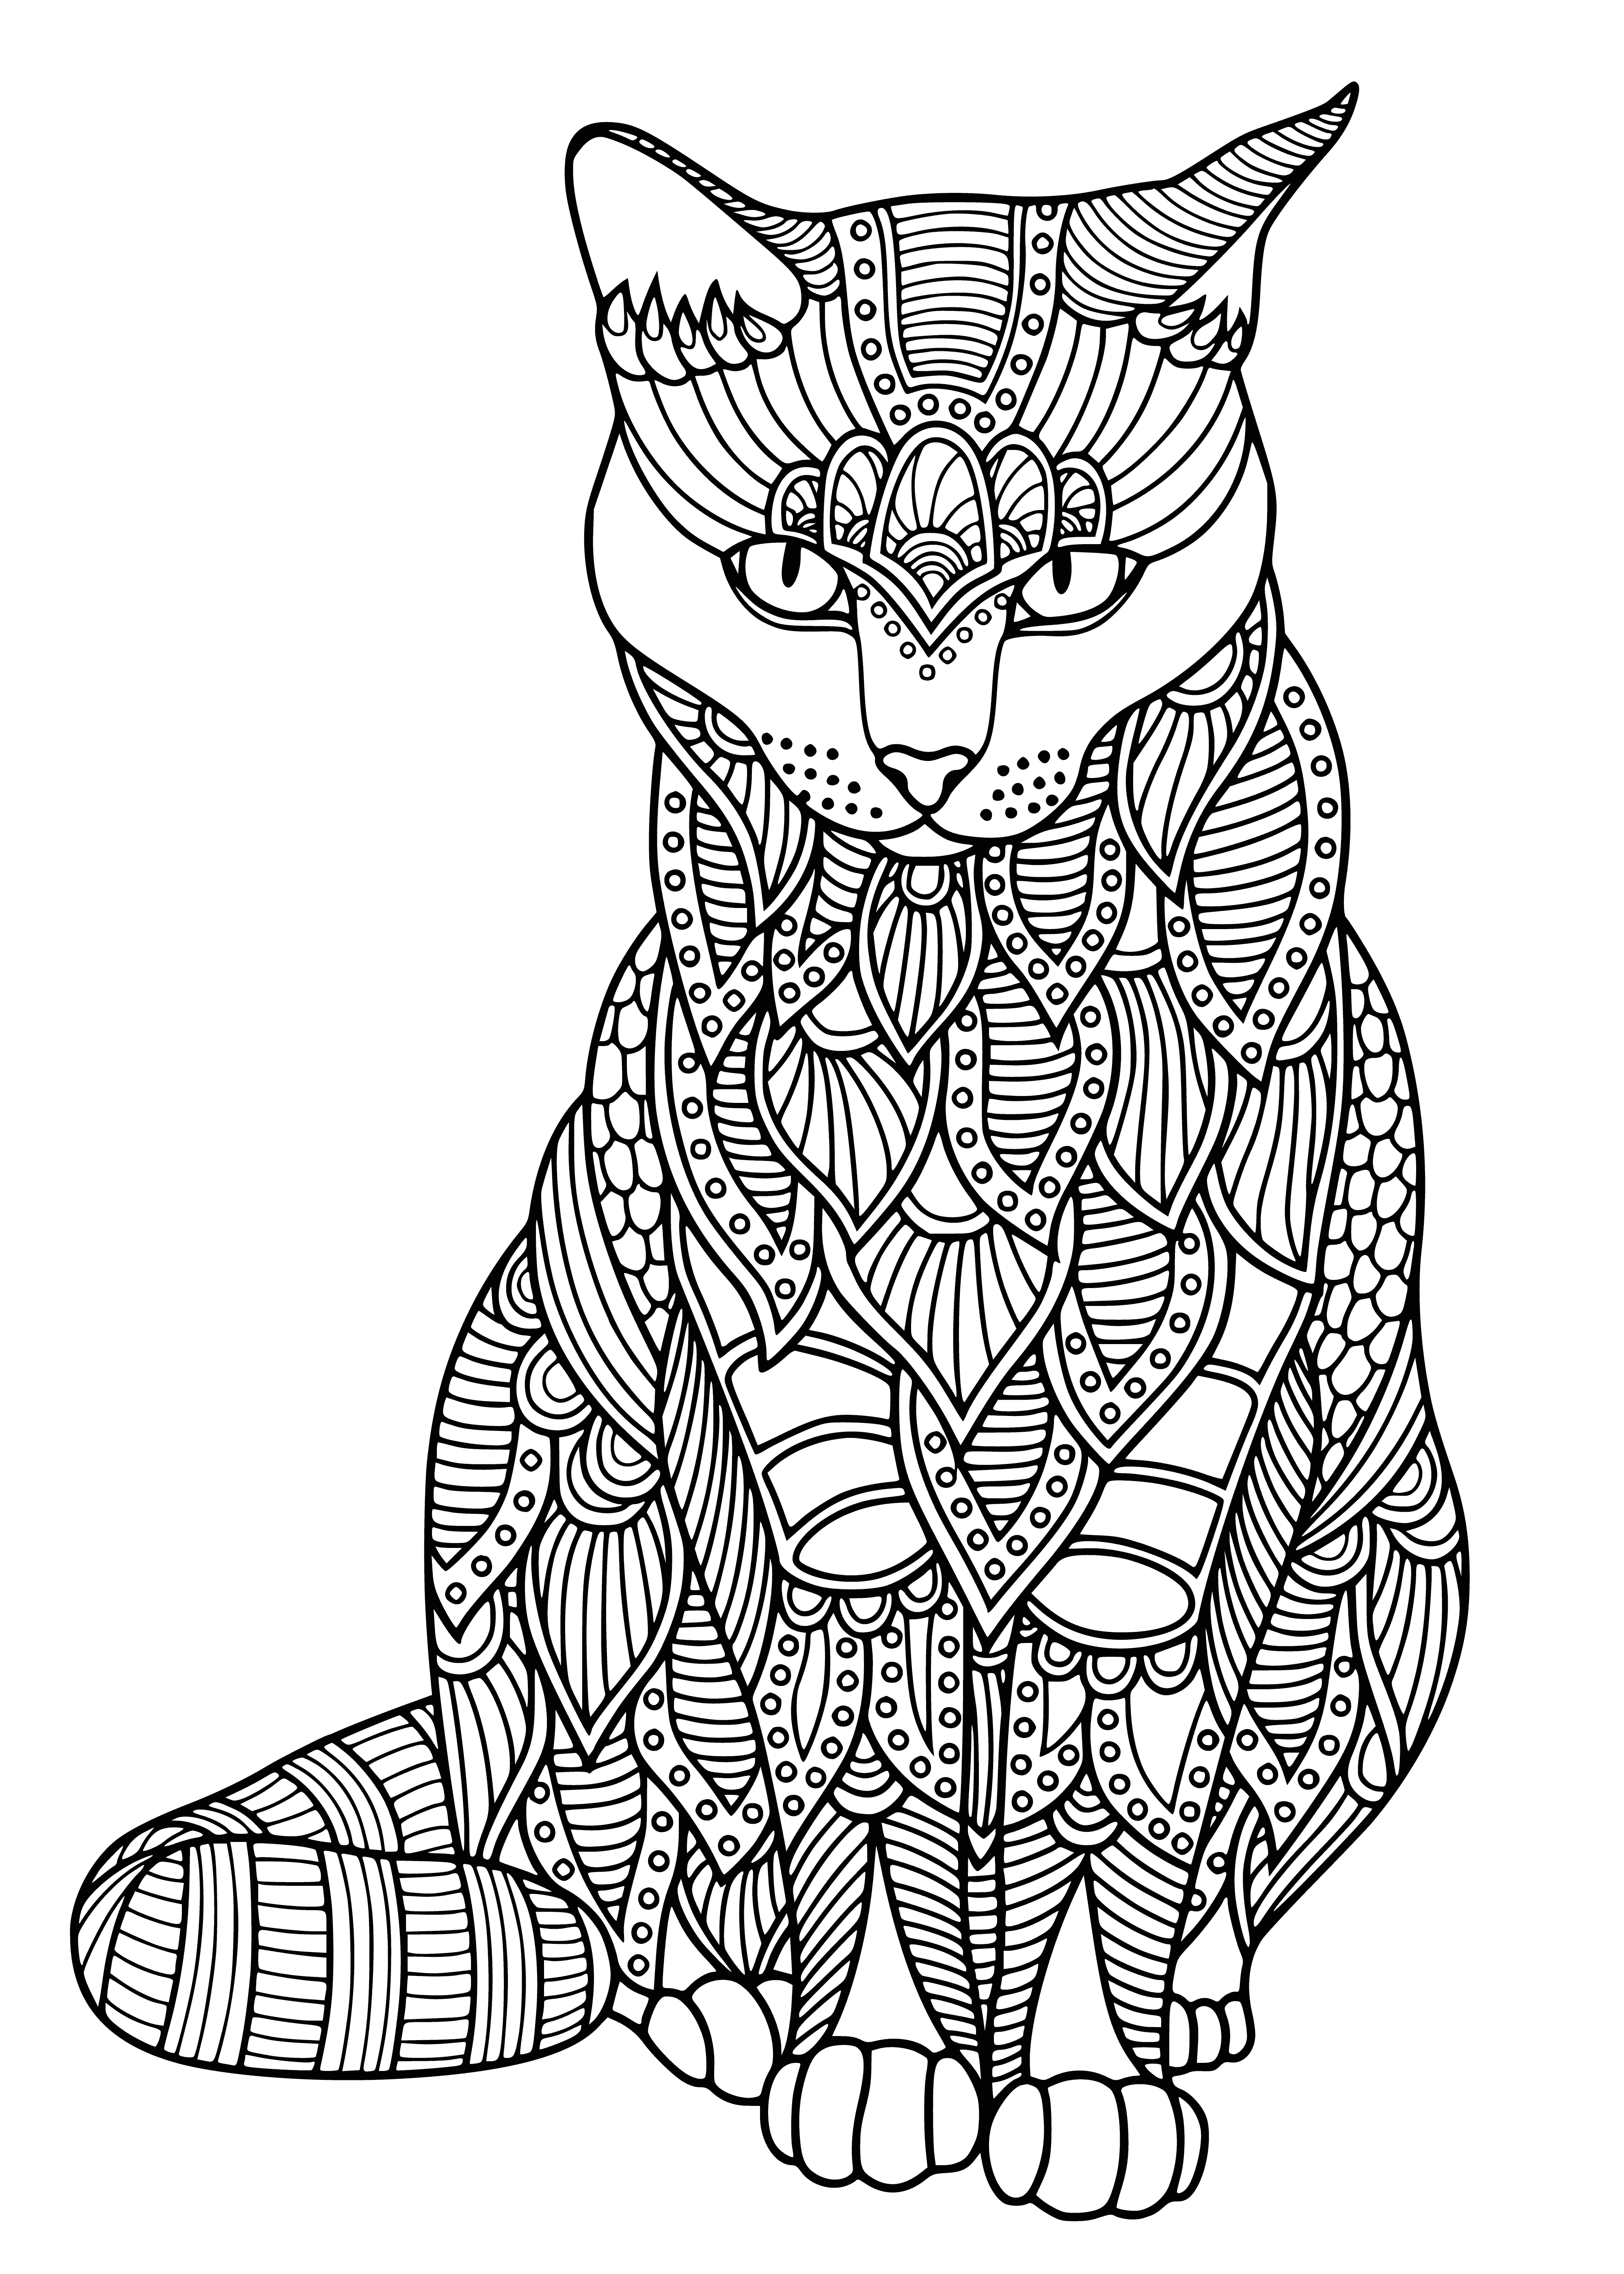 coloring page: Sleeping black & white cat, head on paws, tail wrapped around pillow.